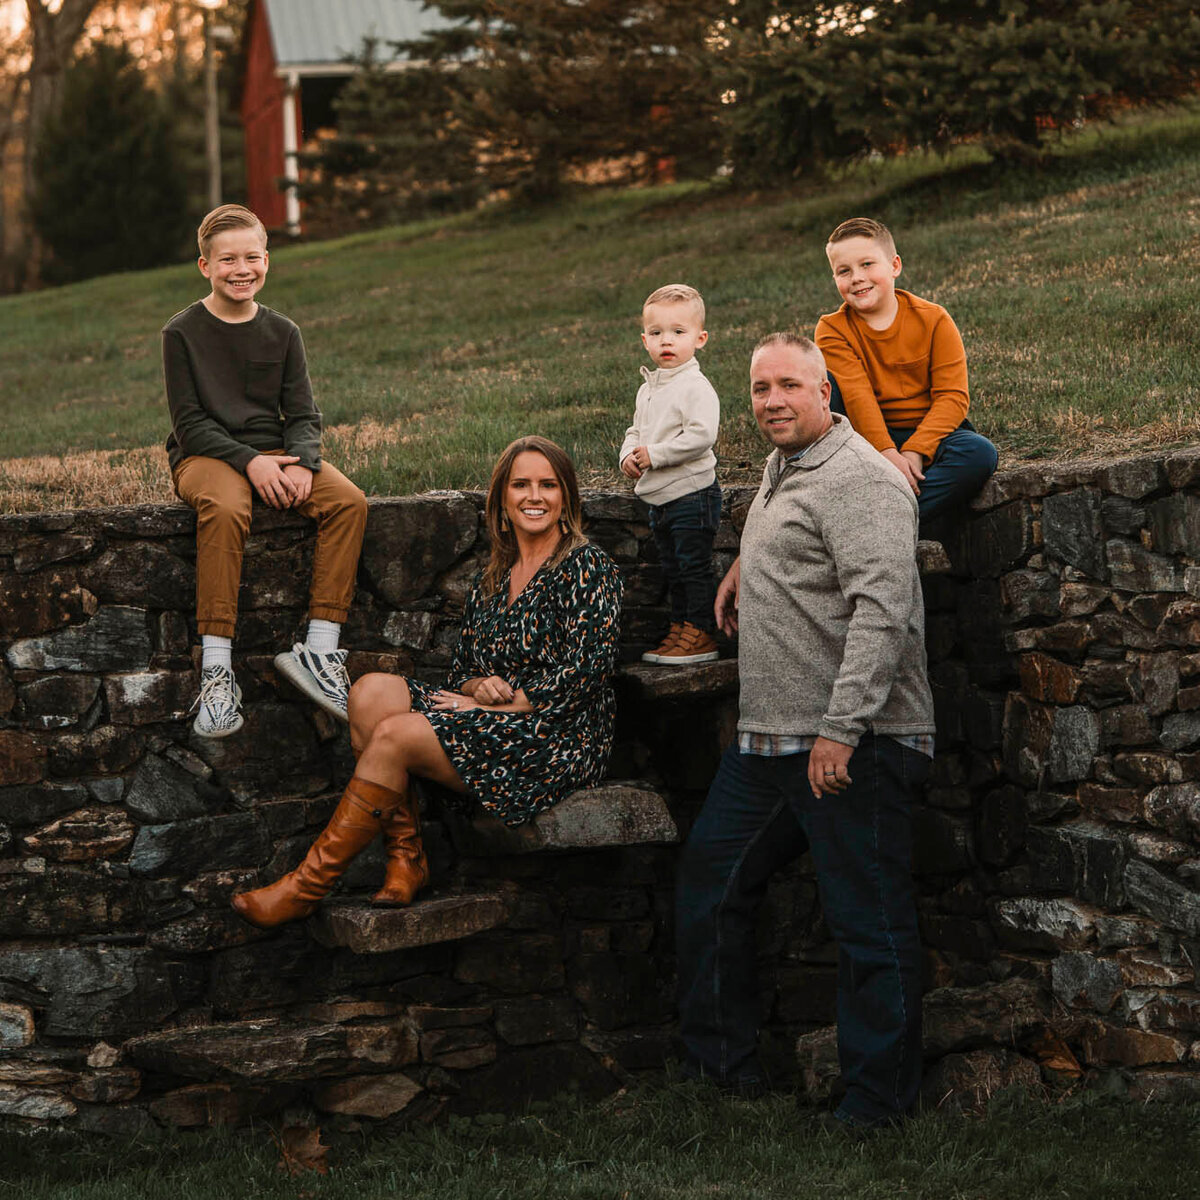 Outdoor fall family portrait